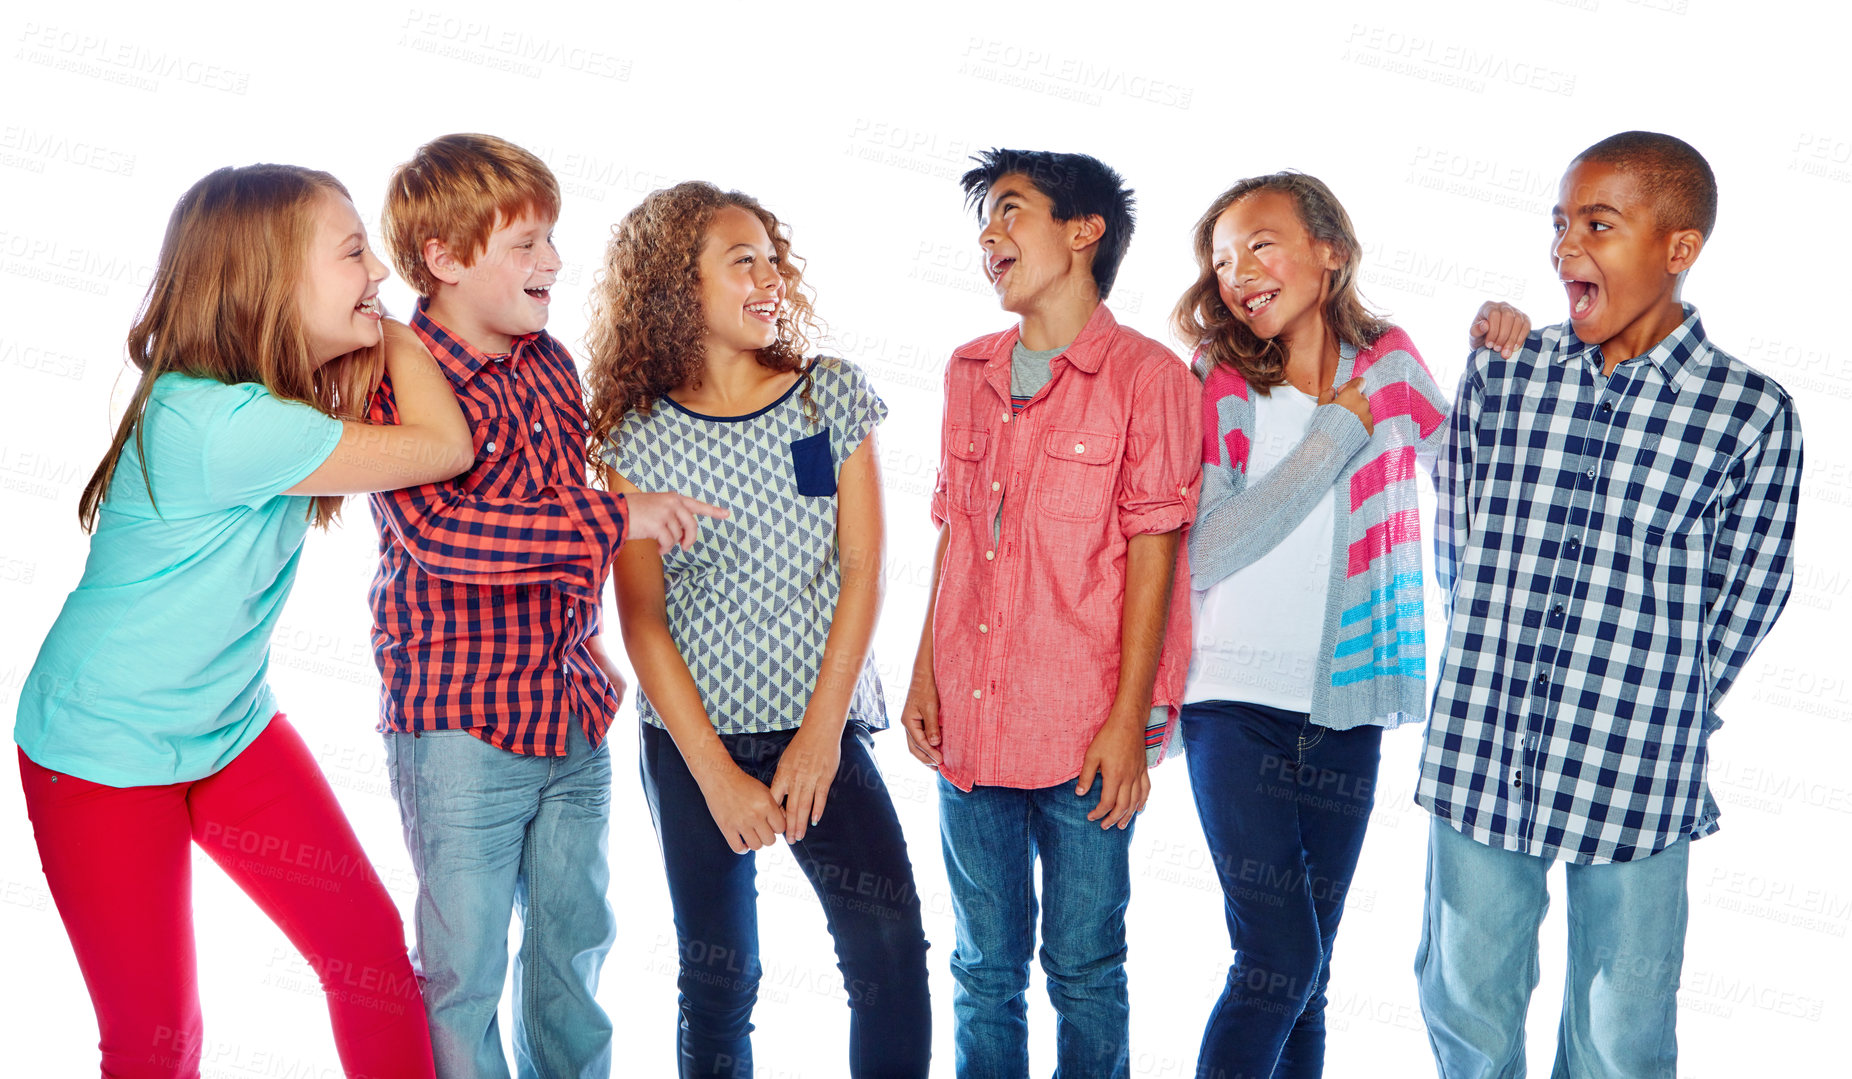 Buy stock photo Studio shot of a group of young friends hanging out against a white background